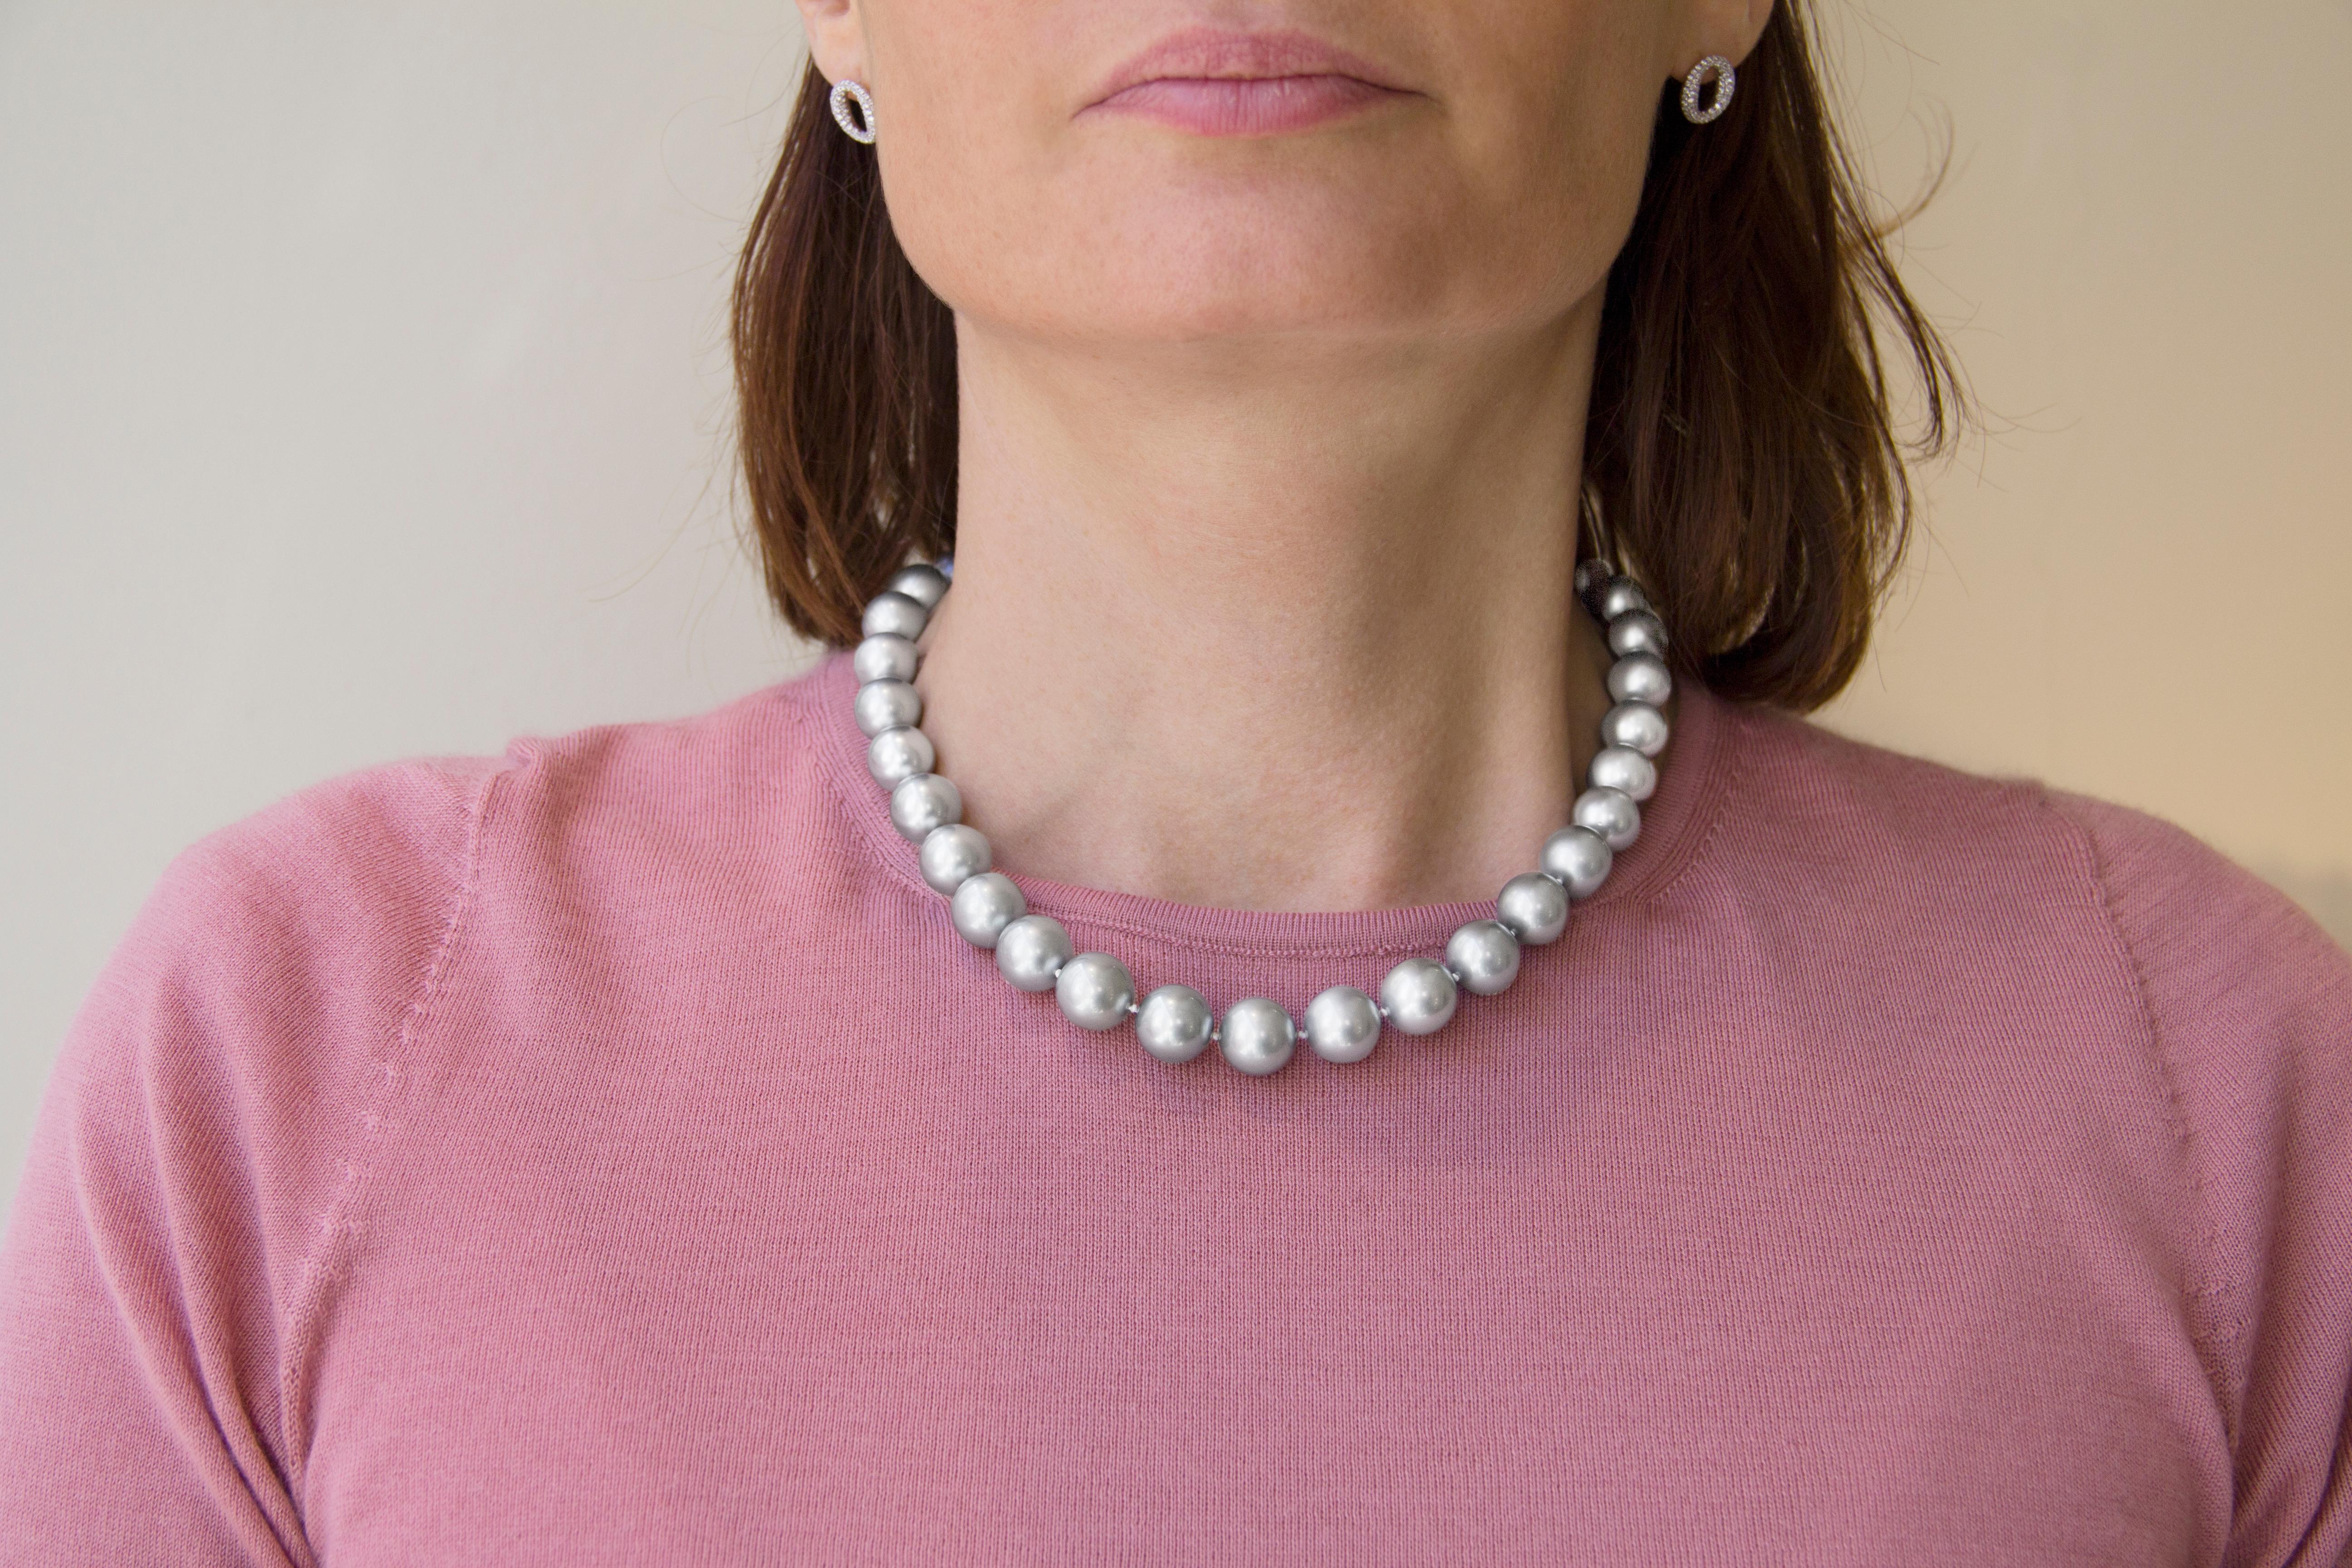 Jona collection, 18.11 inch long necklace consisting of thirty three, 0.49-0.57inch(12.4-14.4mm)diameter, Tahiti light grey pearls, the pearls are strung with an invisible clasps.

Pearl Quality: AA
Pearl Luster: AA

All Jona jewelry is new and has